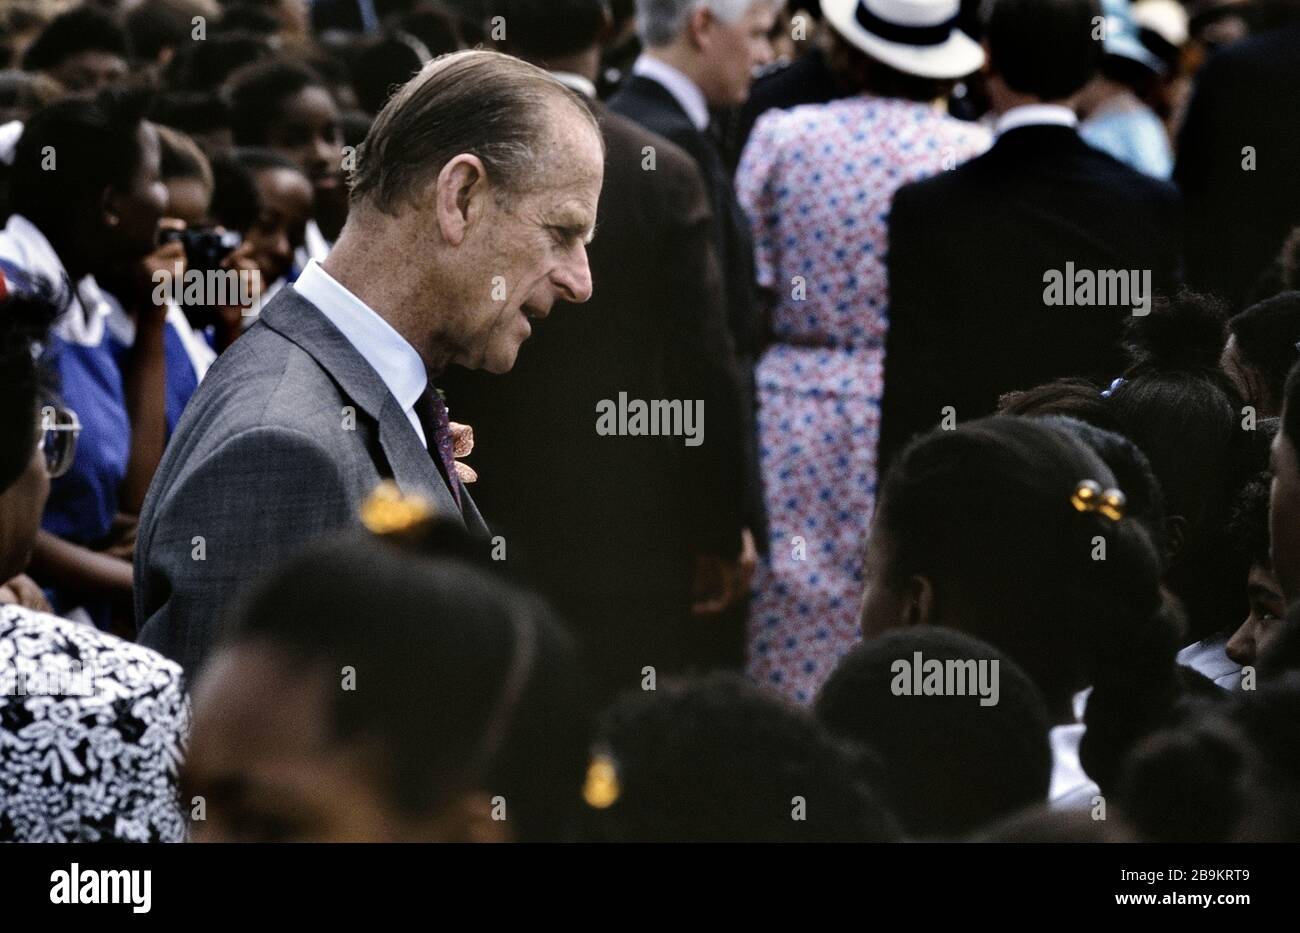 Prince Philip, Duke of Edinburgh  talks with students after attending The Queen's College stone laying ceremony for the school's new building. Barbados, Caribbean. 1989 Stock Photo